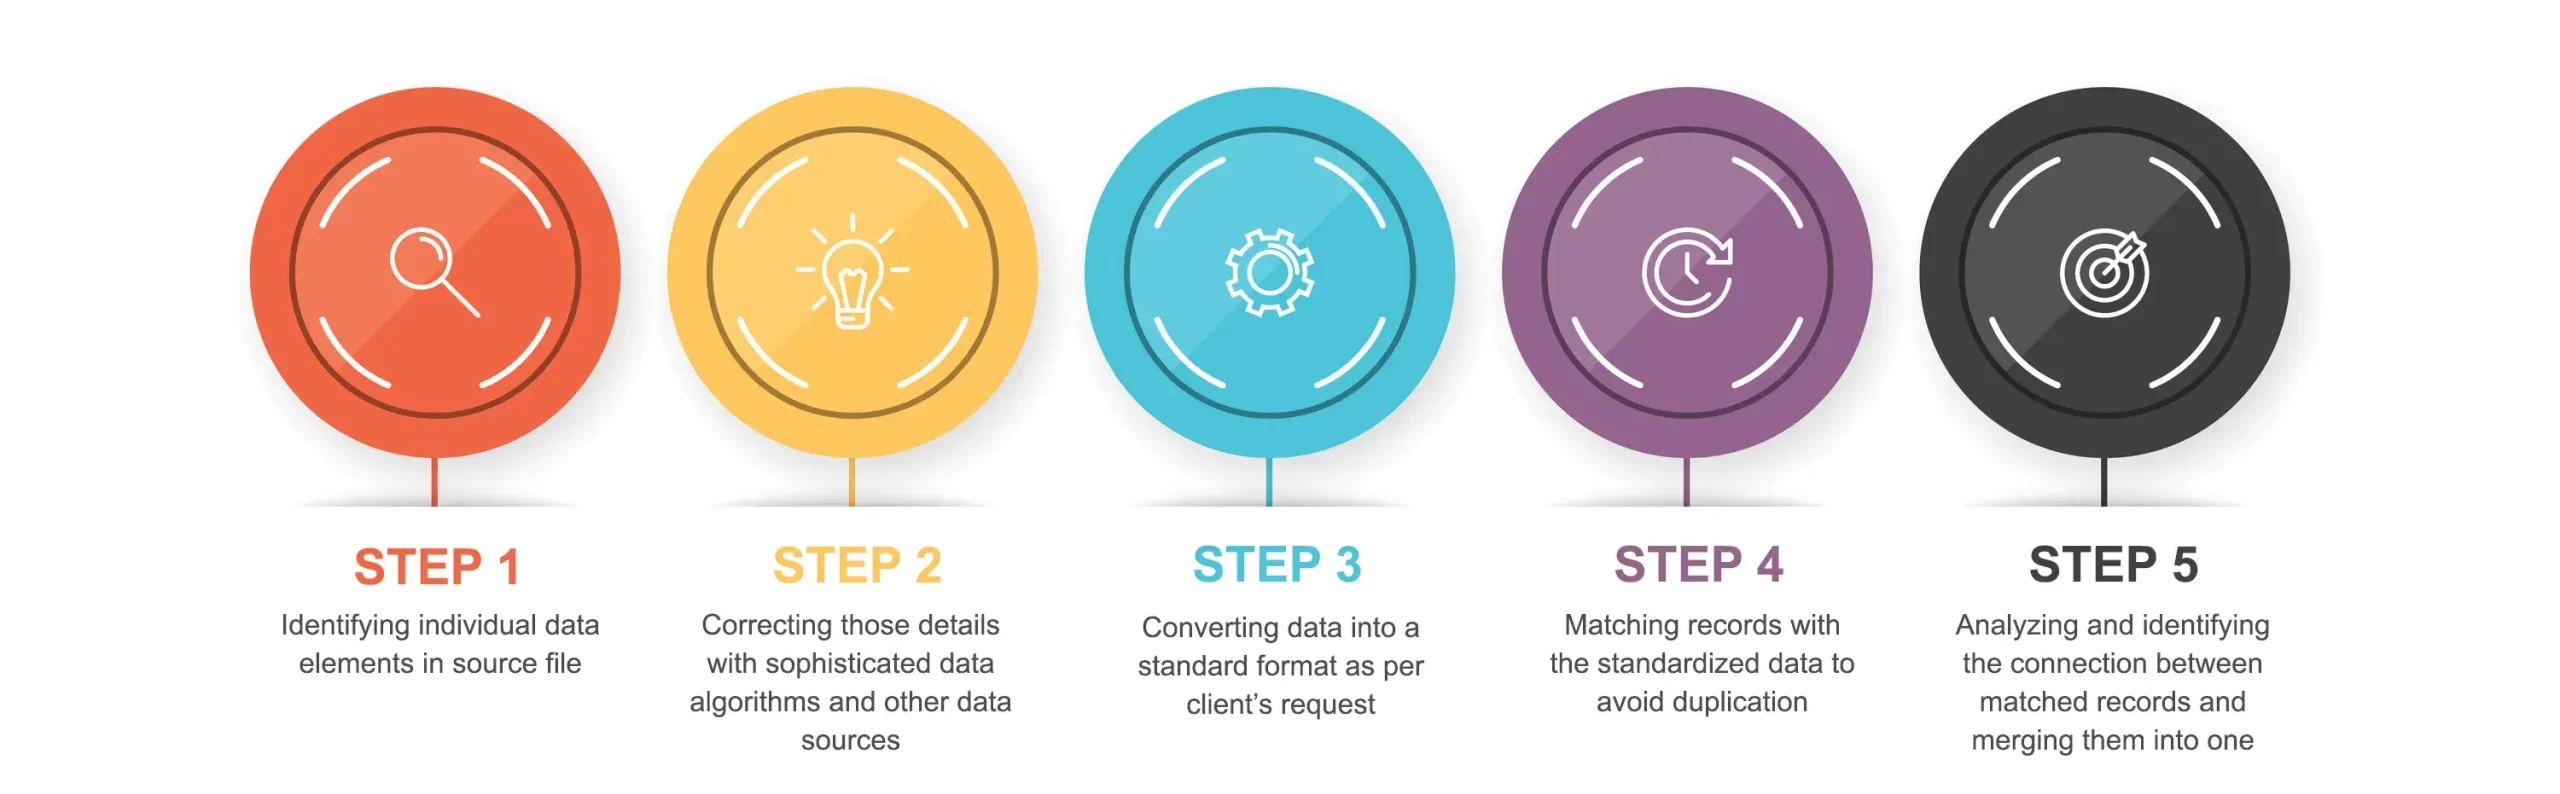 Our 5 Step Data Cleansing Process